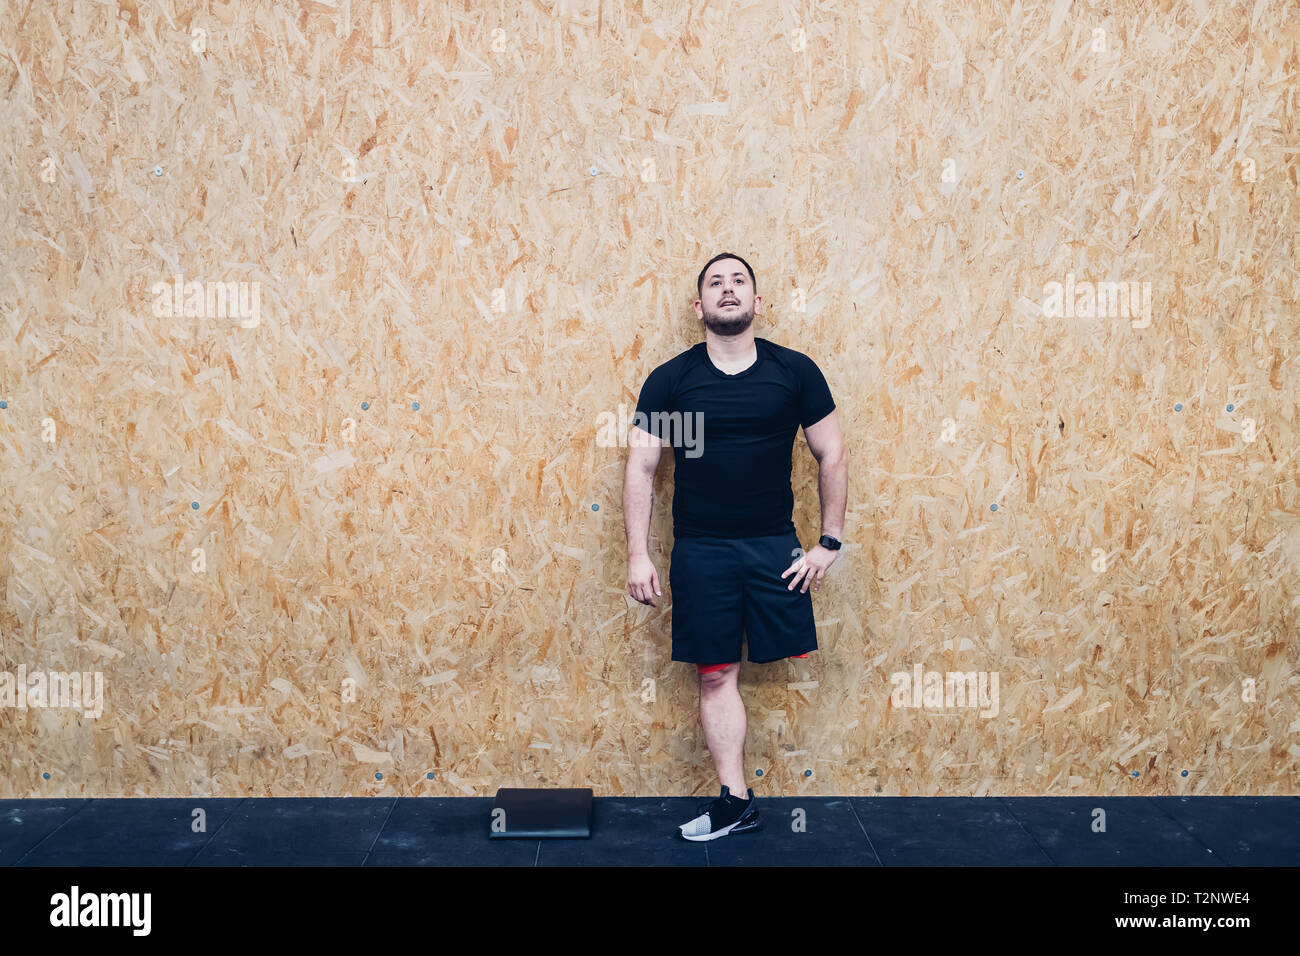 Man with disability leaning against chipboard wall Stock Photo